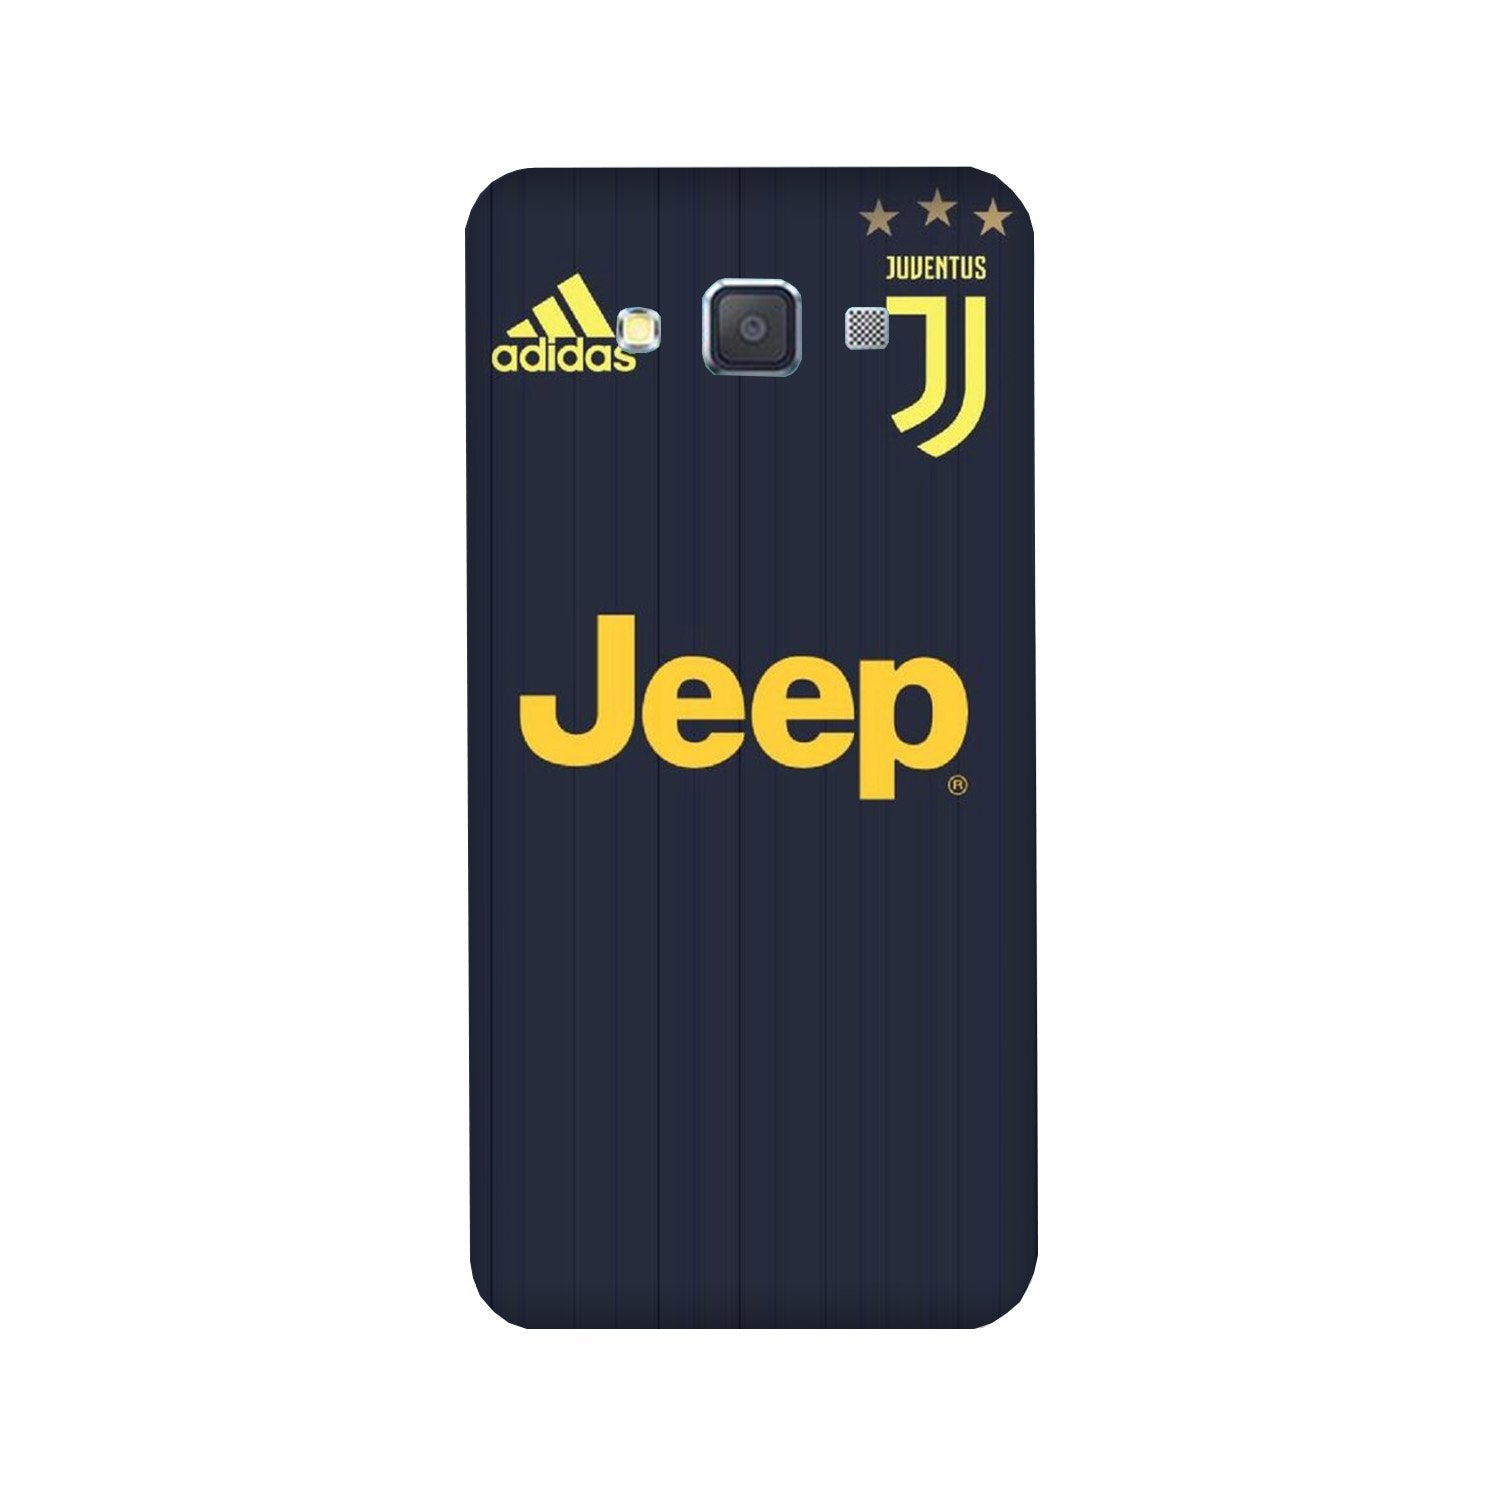 Jeep Juventus Case for Galaxy ON7/ON7 Pro  (Design - 161)